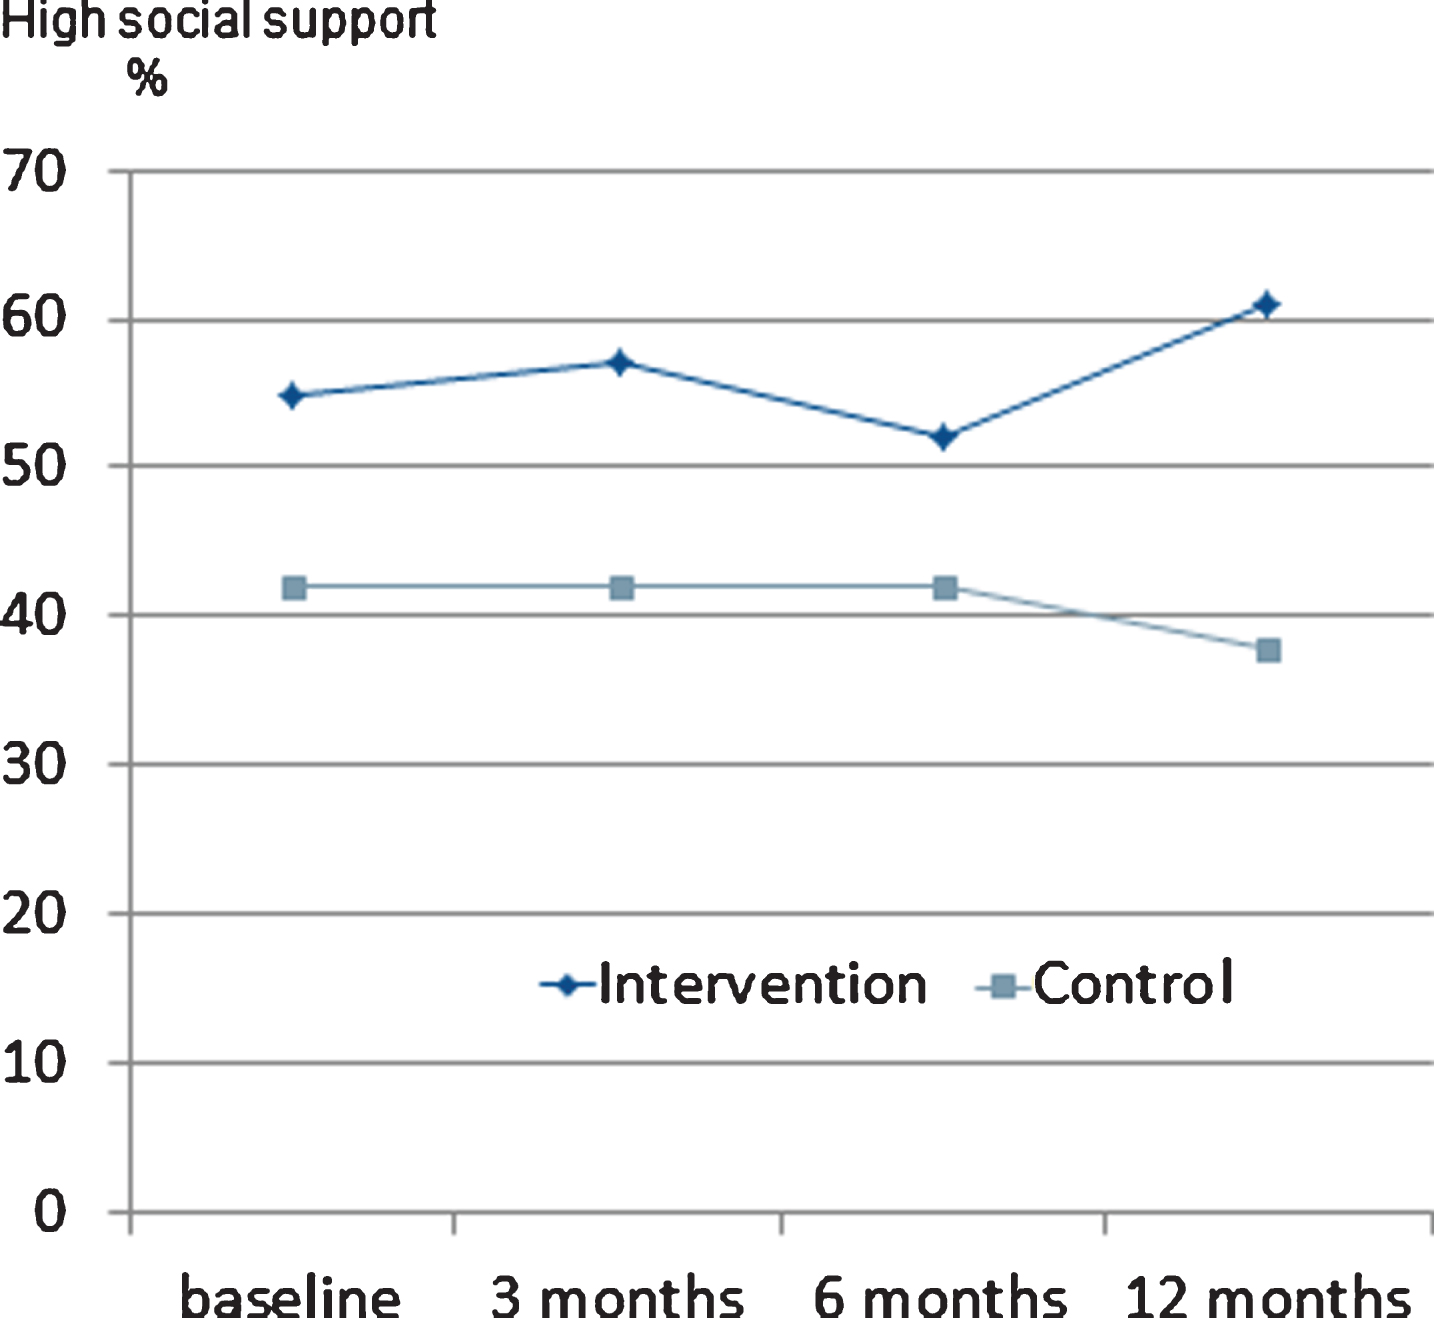 Percentage of individuals in intervention and control group at baseline, 3, 6, and 12 months who perceived high social support. Statistically significant difference at 12 months between intervention and control group, p = 0.009.